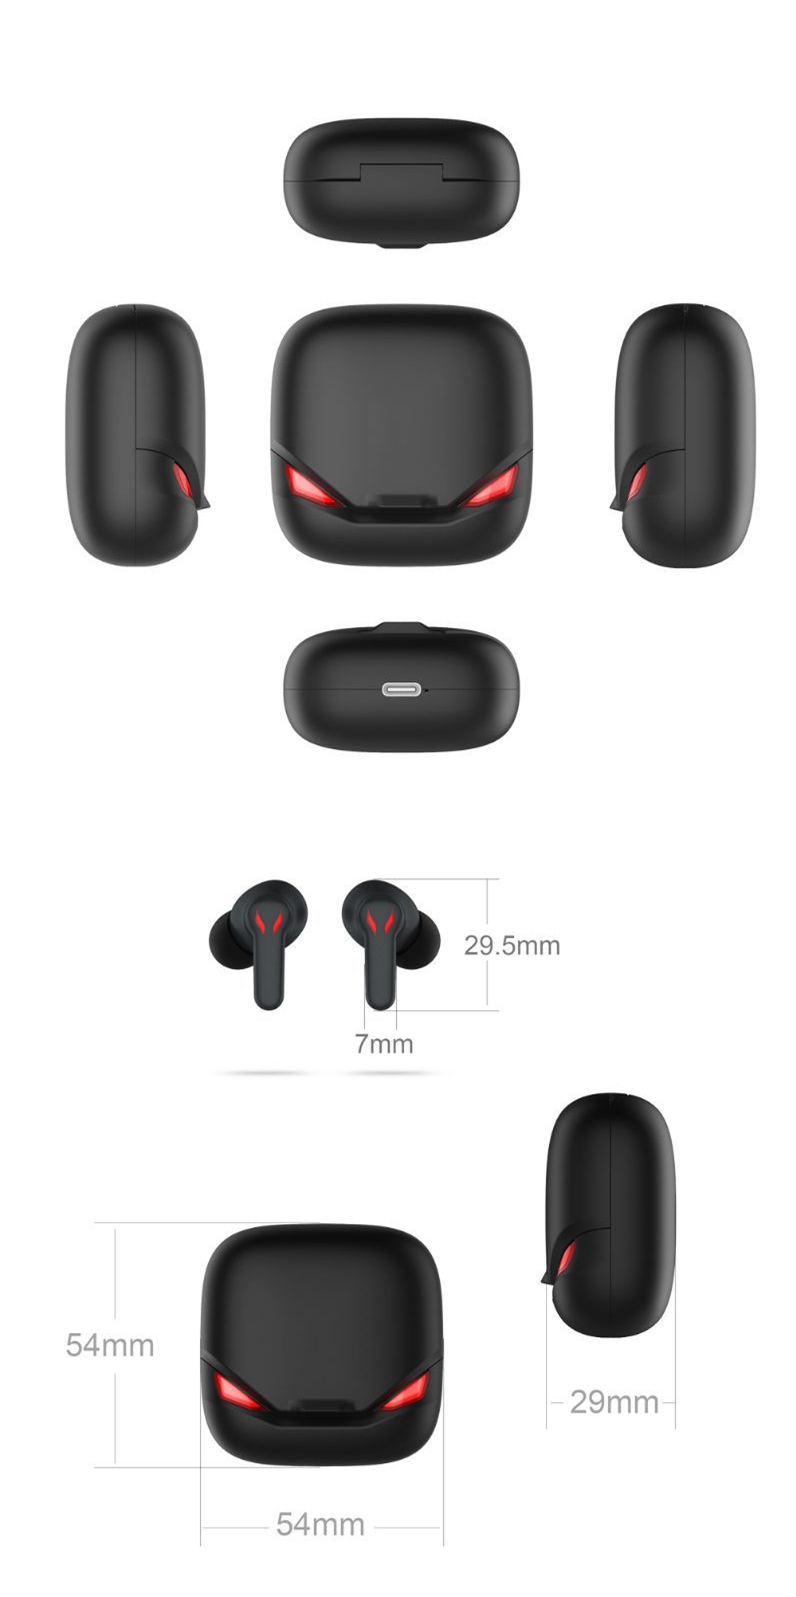 Bakeey-GM18-TWS-bluetooth-Gaming-Earphones-Low-Latency-Headsets-HiFi-Bass-Touch-Control-Headphones-w-1907274-13